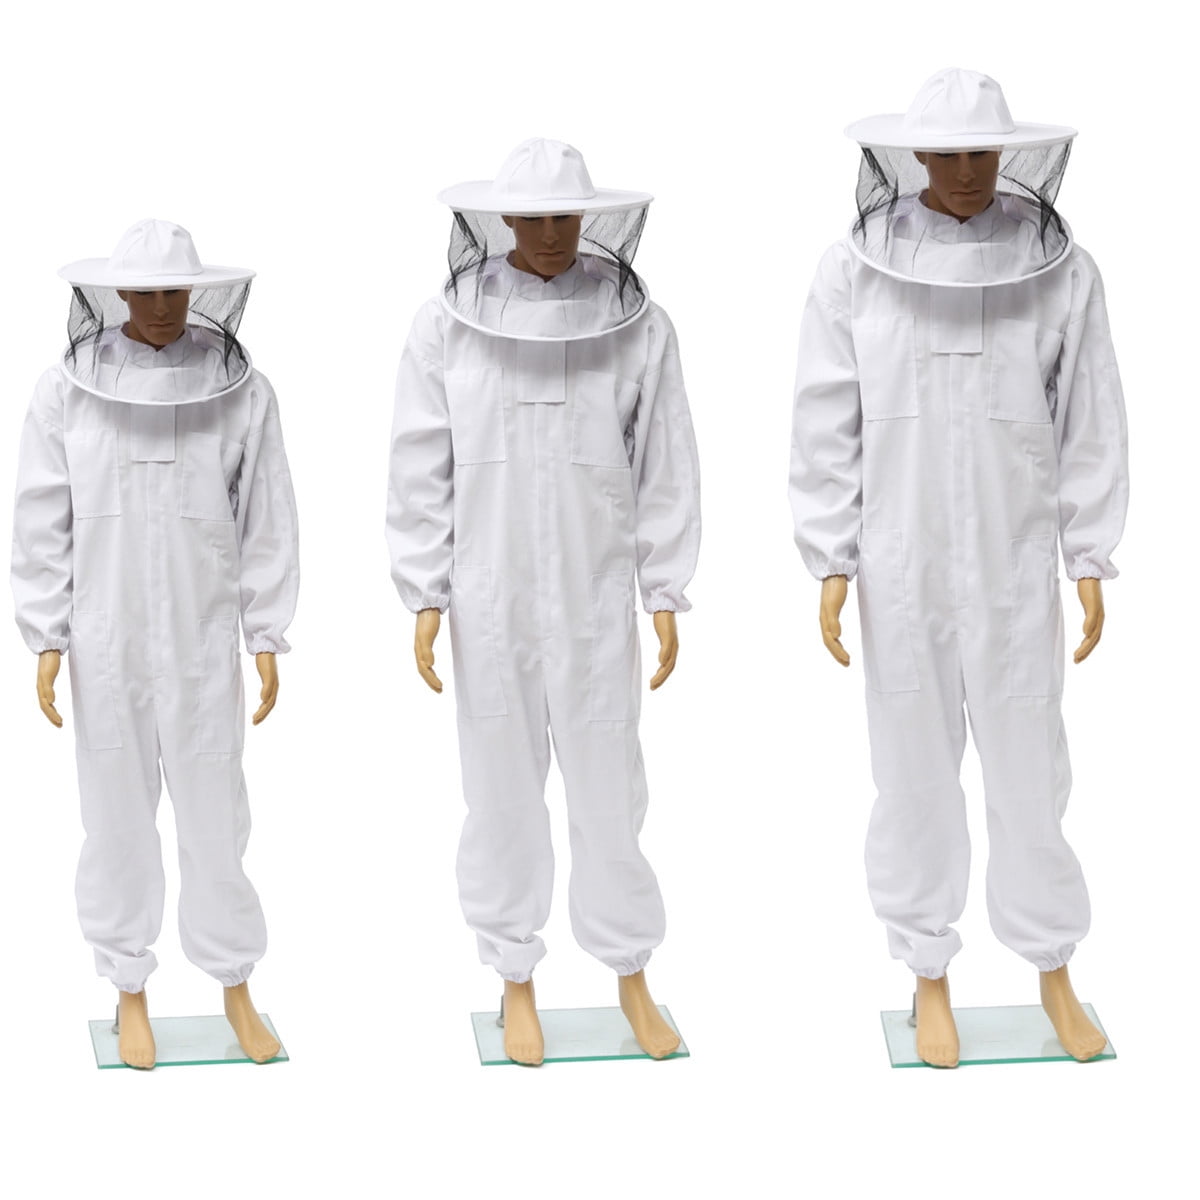 Beekeepers suit Beekeeping Bee Suit with Fencing Veil including Bee Gloves-SMALL 